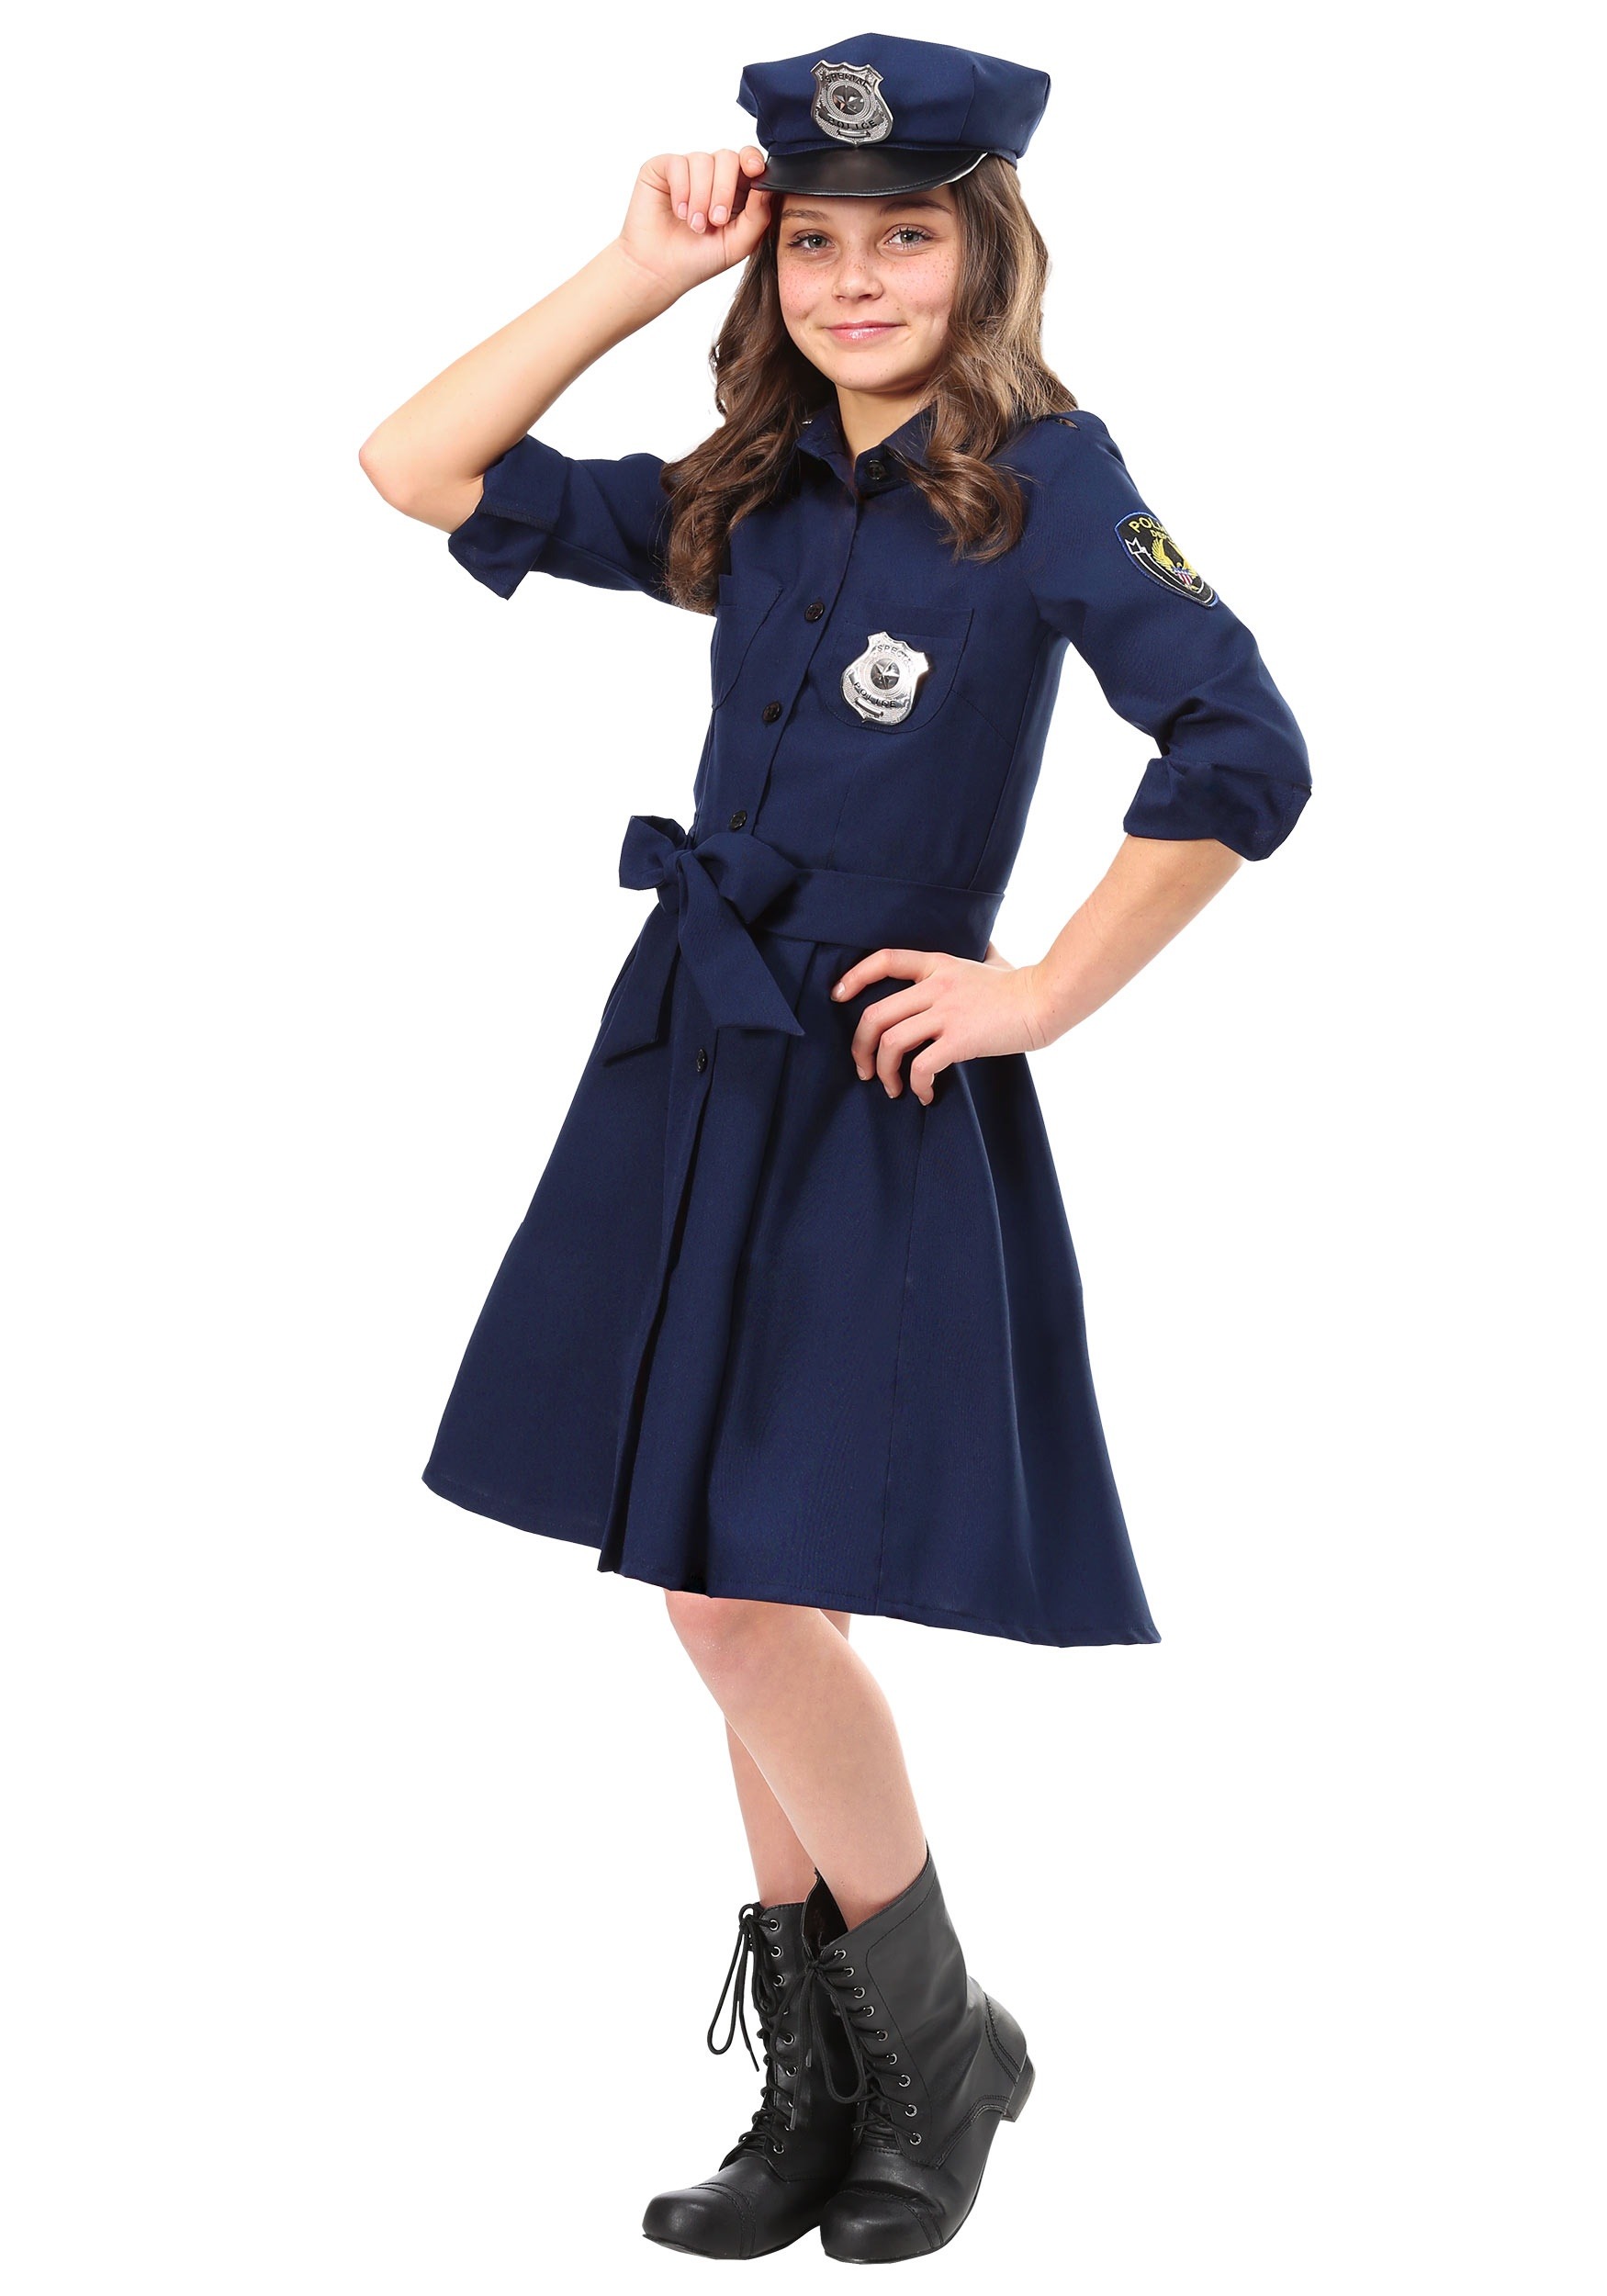 Photos - Fancy Dress Police FUN Costumes Girl's Helpful  Officer Costume Blue 